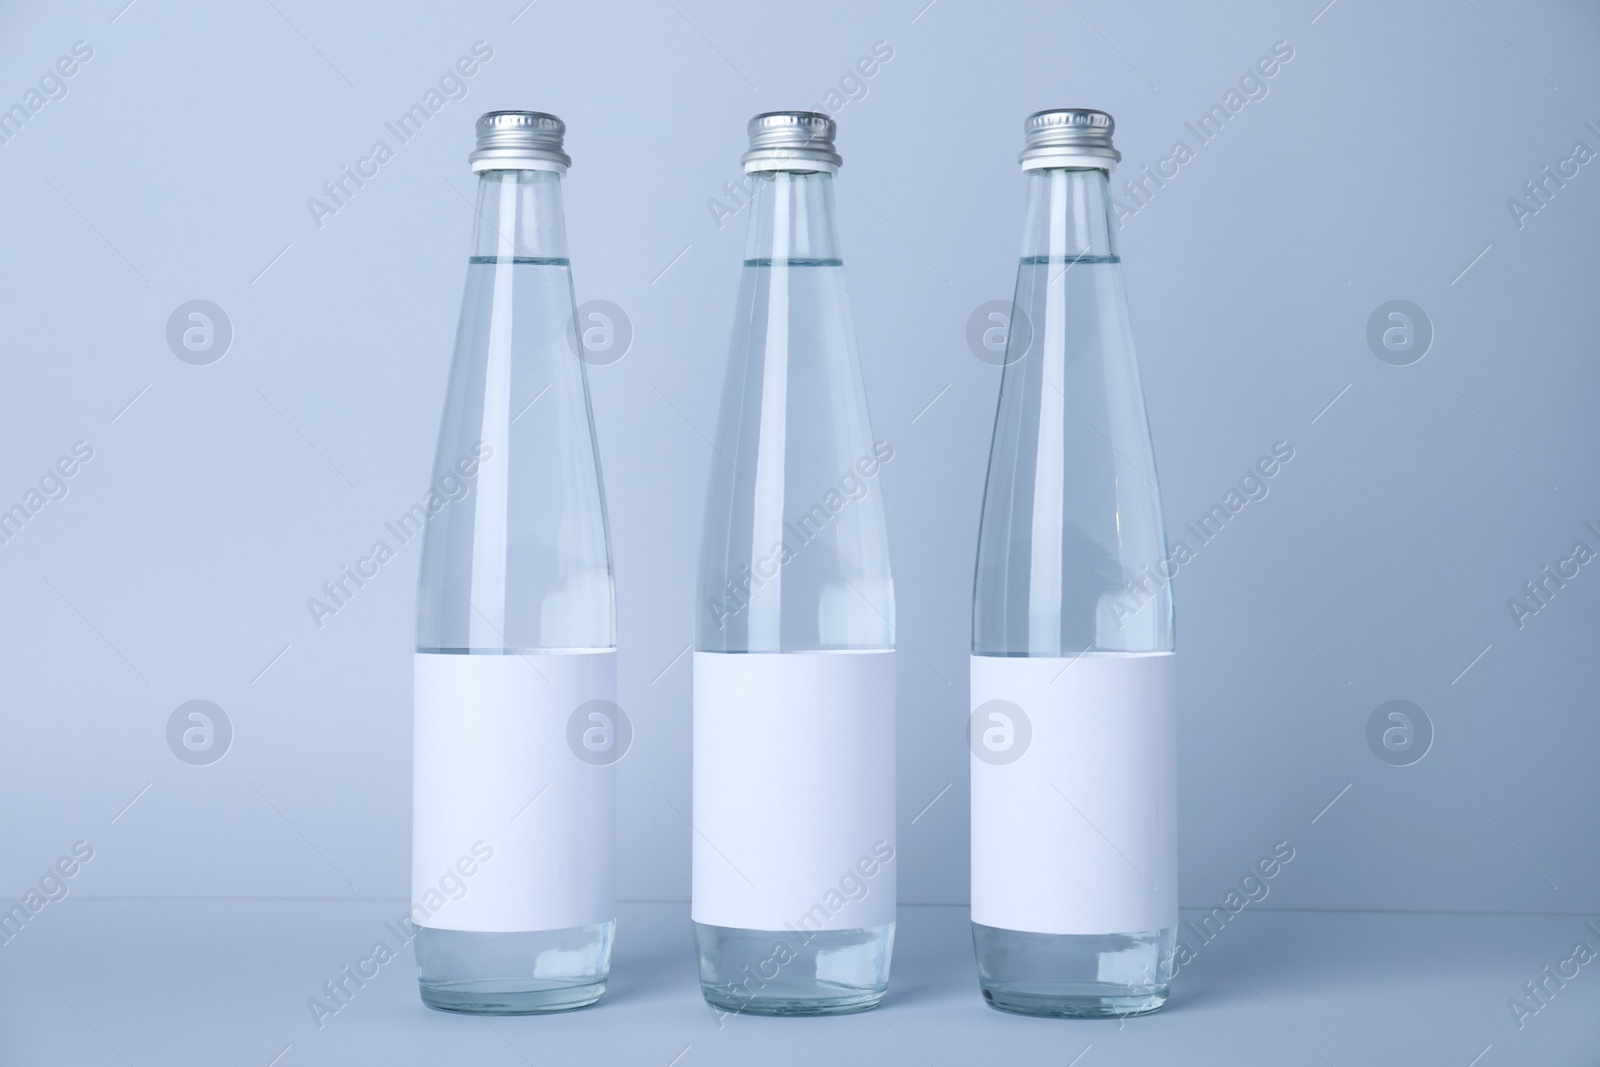 Photo of Glass bottles with soda water on light background